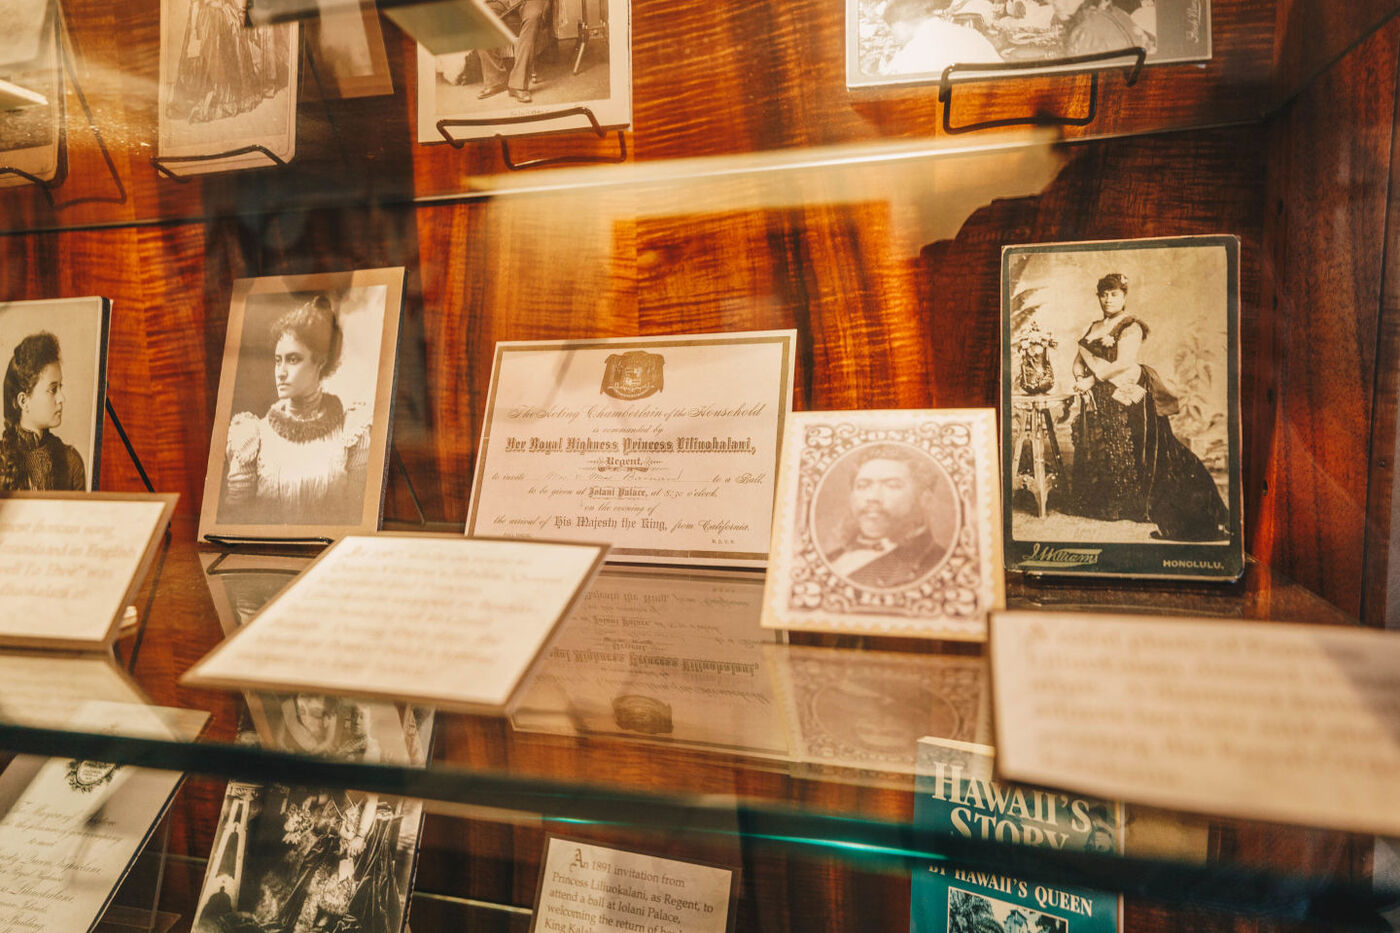 Glass case exhibit of historical photos and information about Hawaii's past history